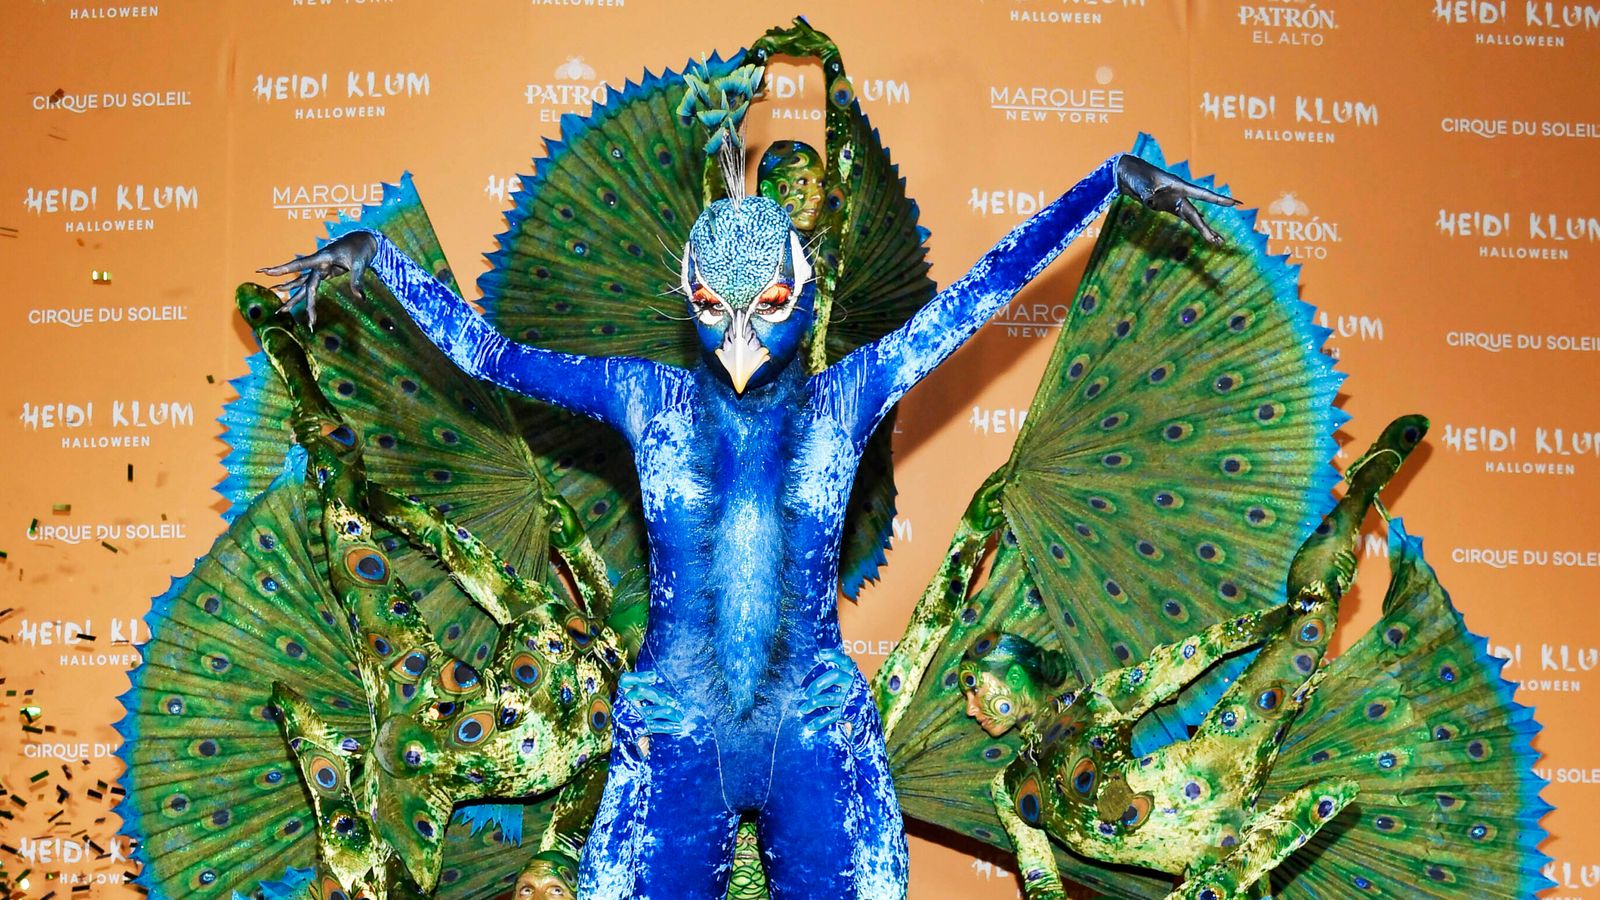 Heidi Klum goes all out for Halloween once more as celebs don their